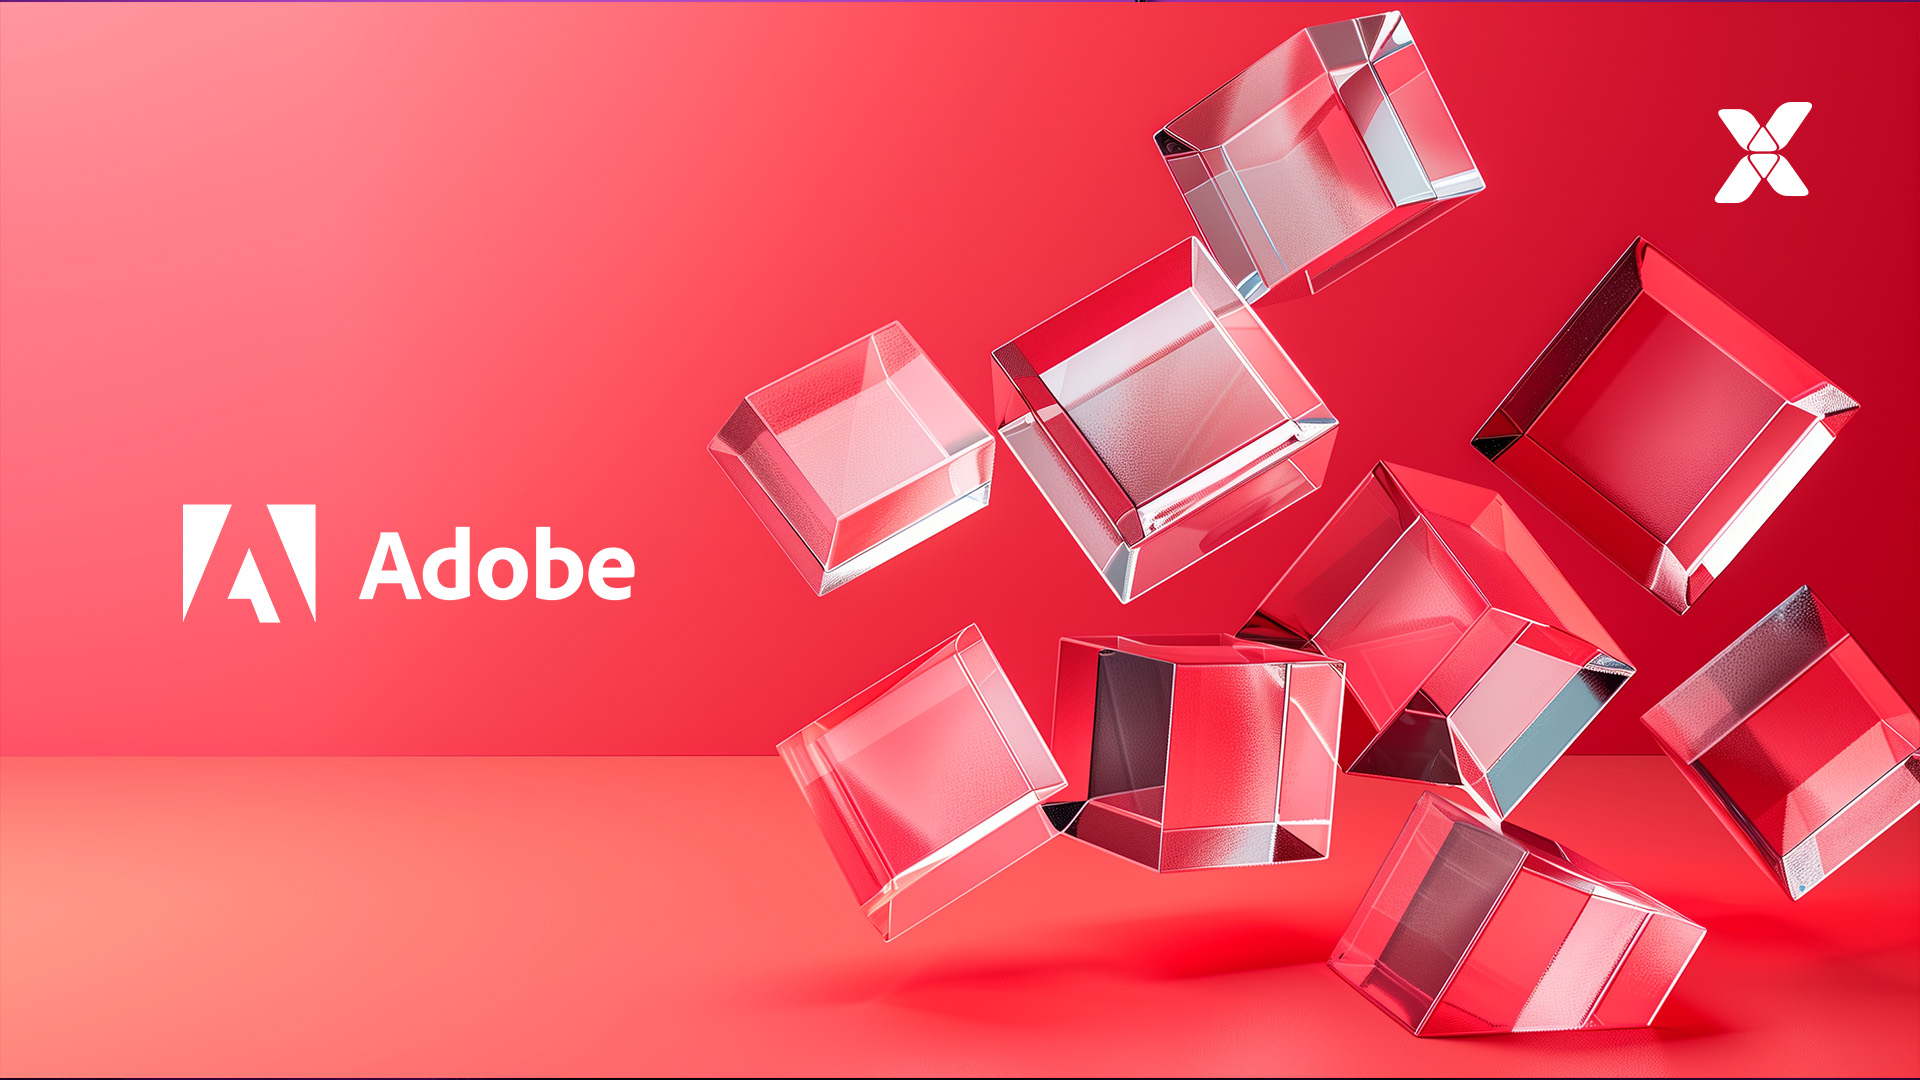 image of white adobe and vaimo logos on red background with clear cubes